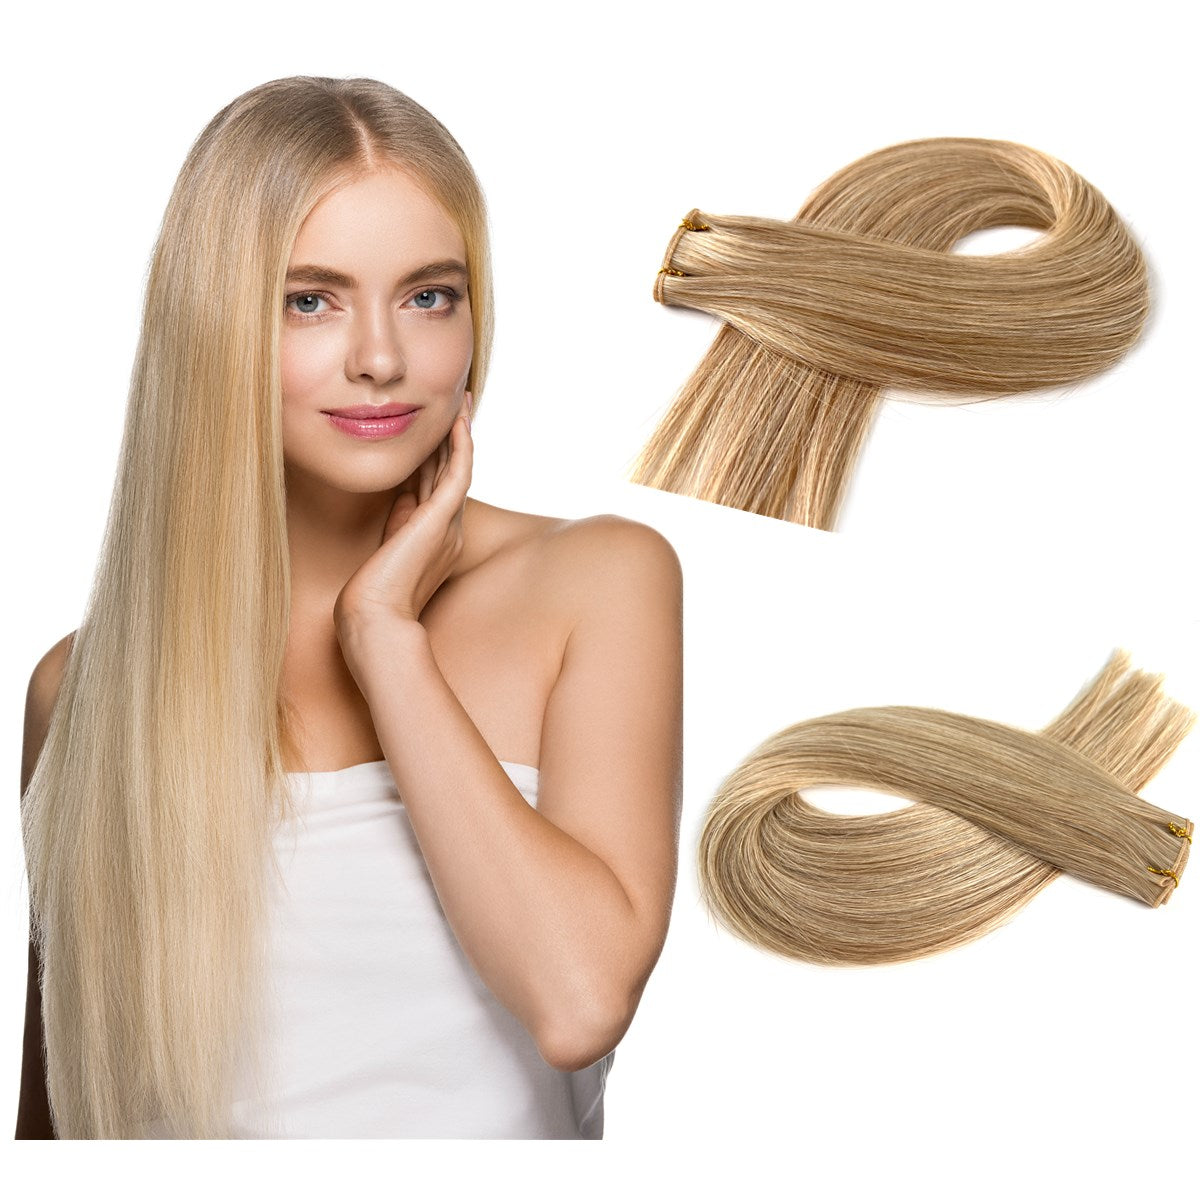 Genius Hair Wefts - Top Tier Weft Hair Extensions  #M6/60/1001 | Hairperfecto